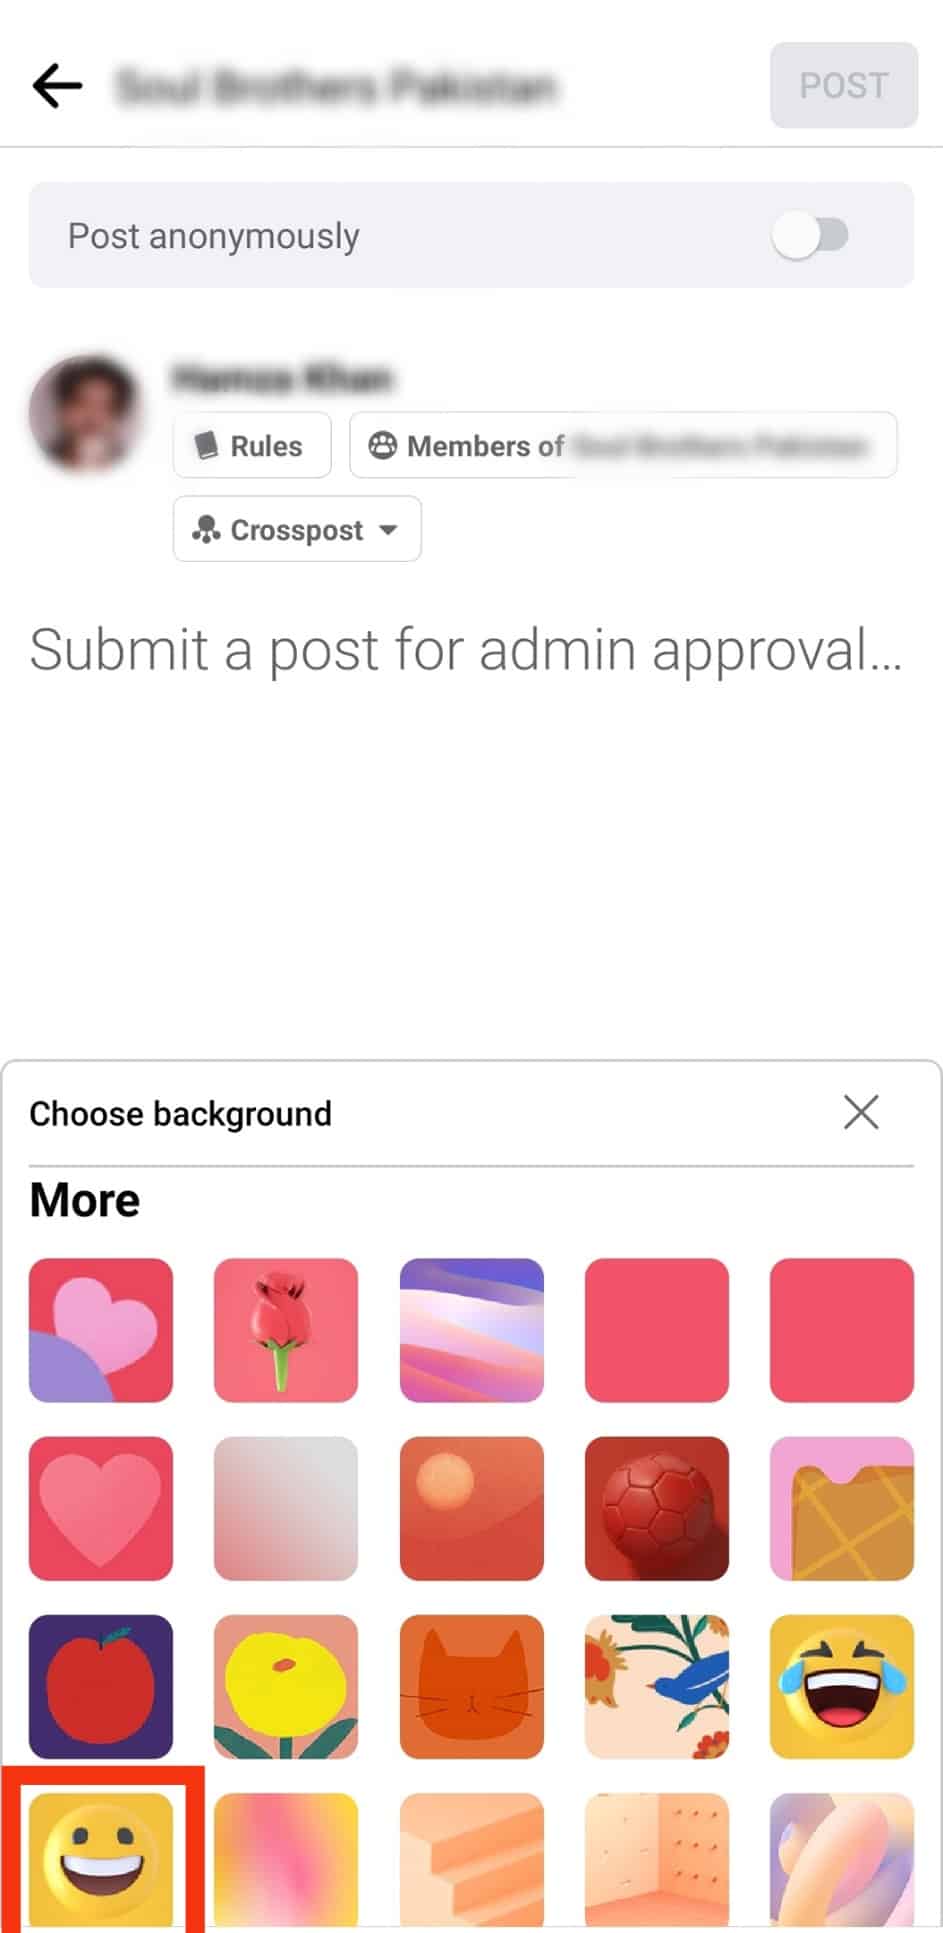 Select Your Preferred Background